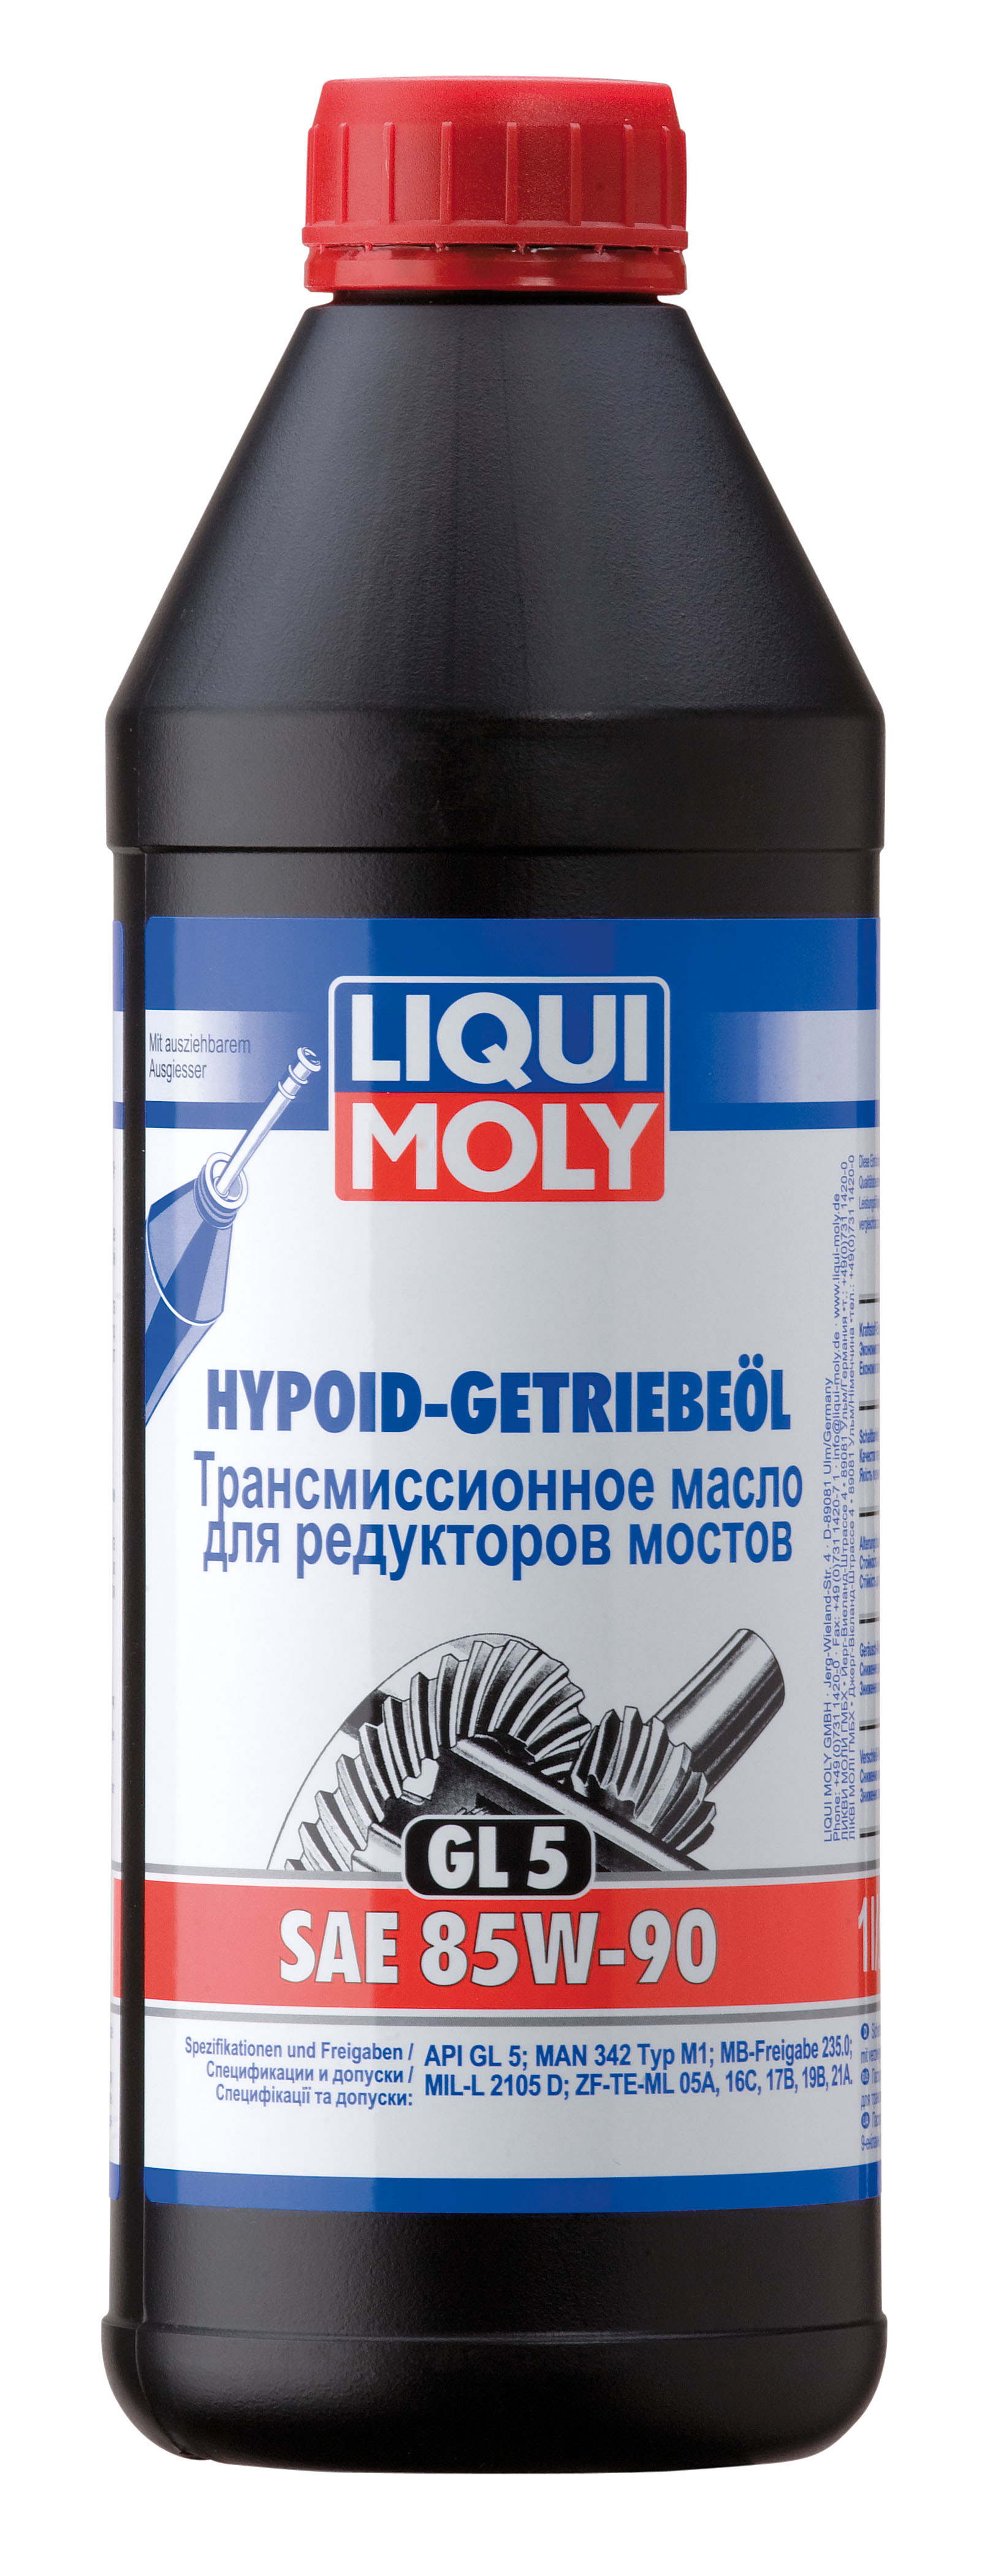 Масло транс Hypoid Getriebeoil 85W-90 (1 л.)